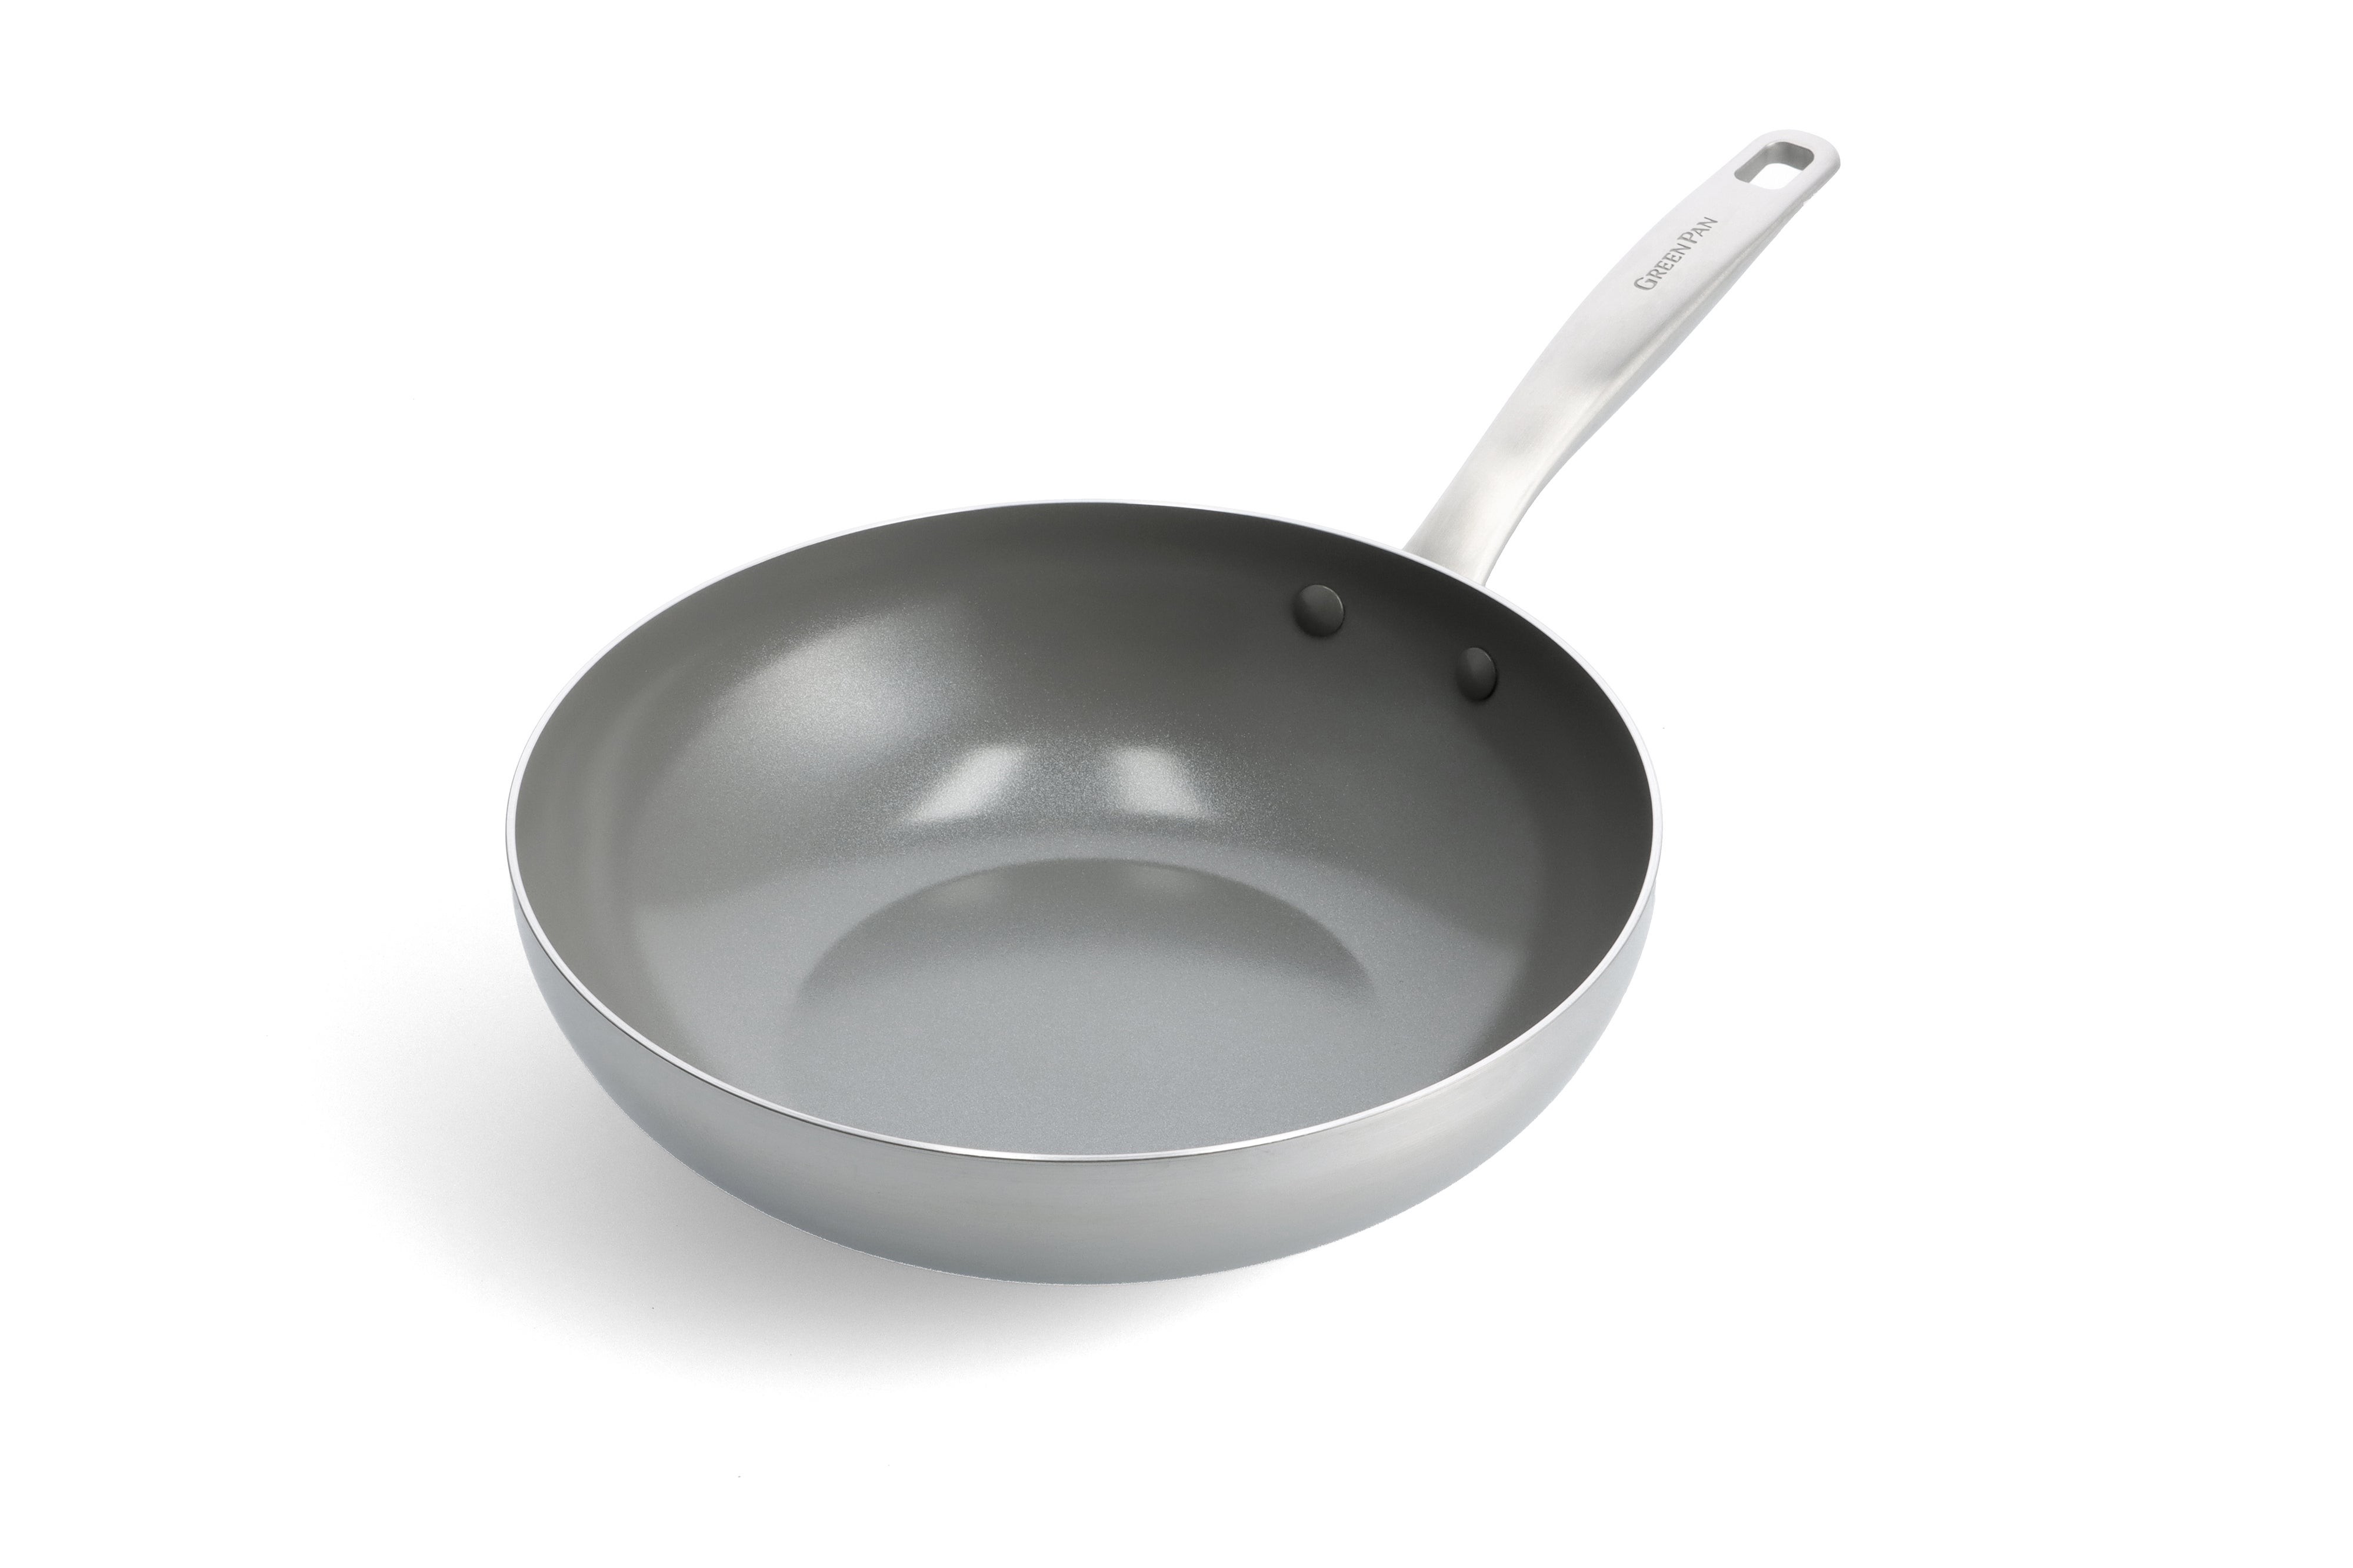 Chatham 11" Tri-Ply Stainless Steel Nonstick Wok